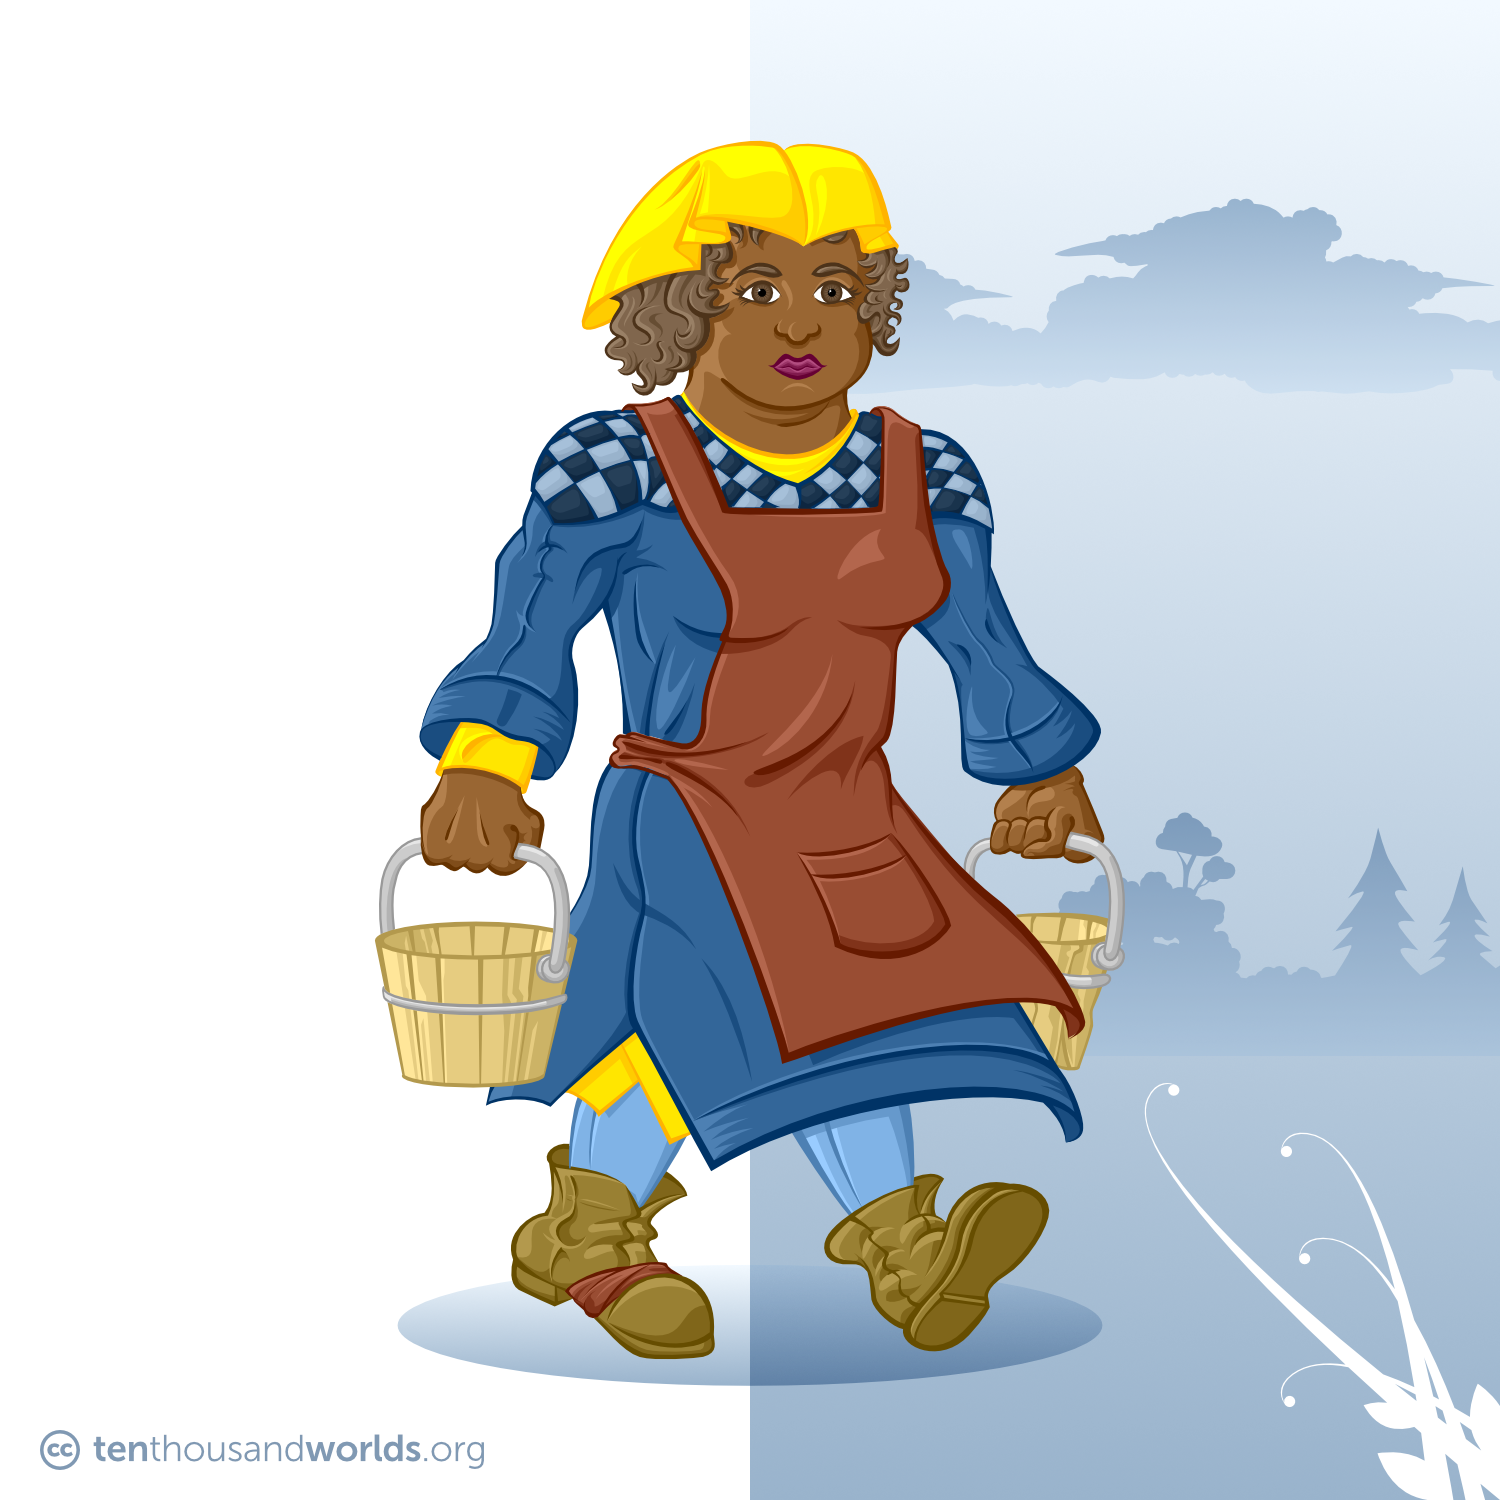 A solidly-built farm woman with cinnamon skin and dark curls, in a yellow neckerchief, multilayered blue and yellow dress, faded red apron, and poorly-repaired tan boots, hauling two wooden buckets.